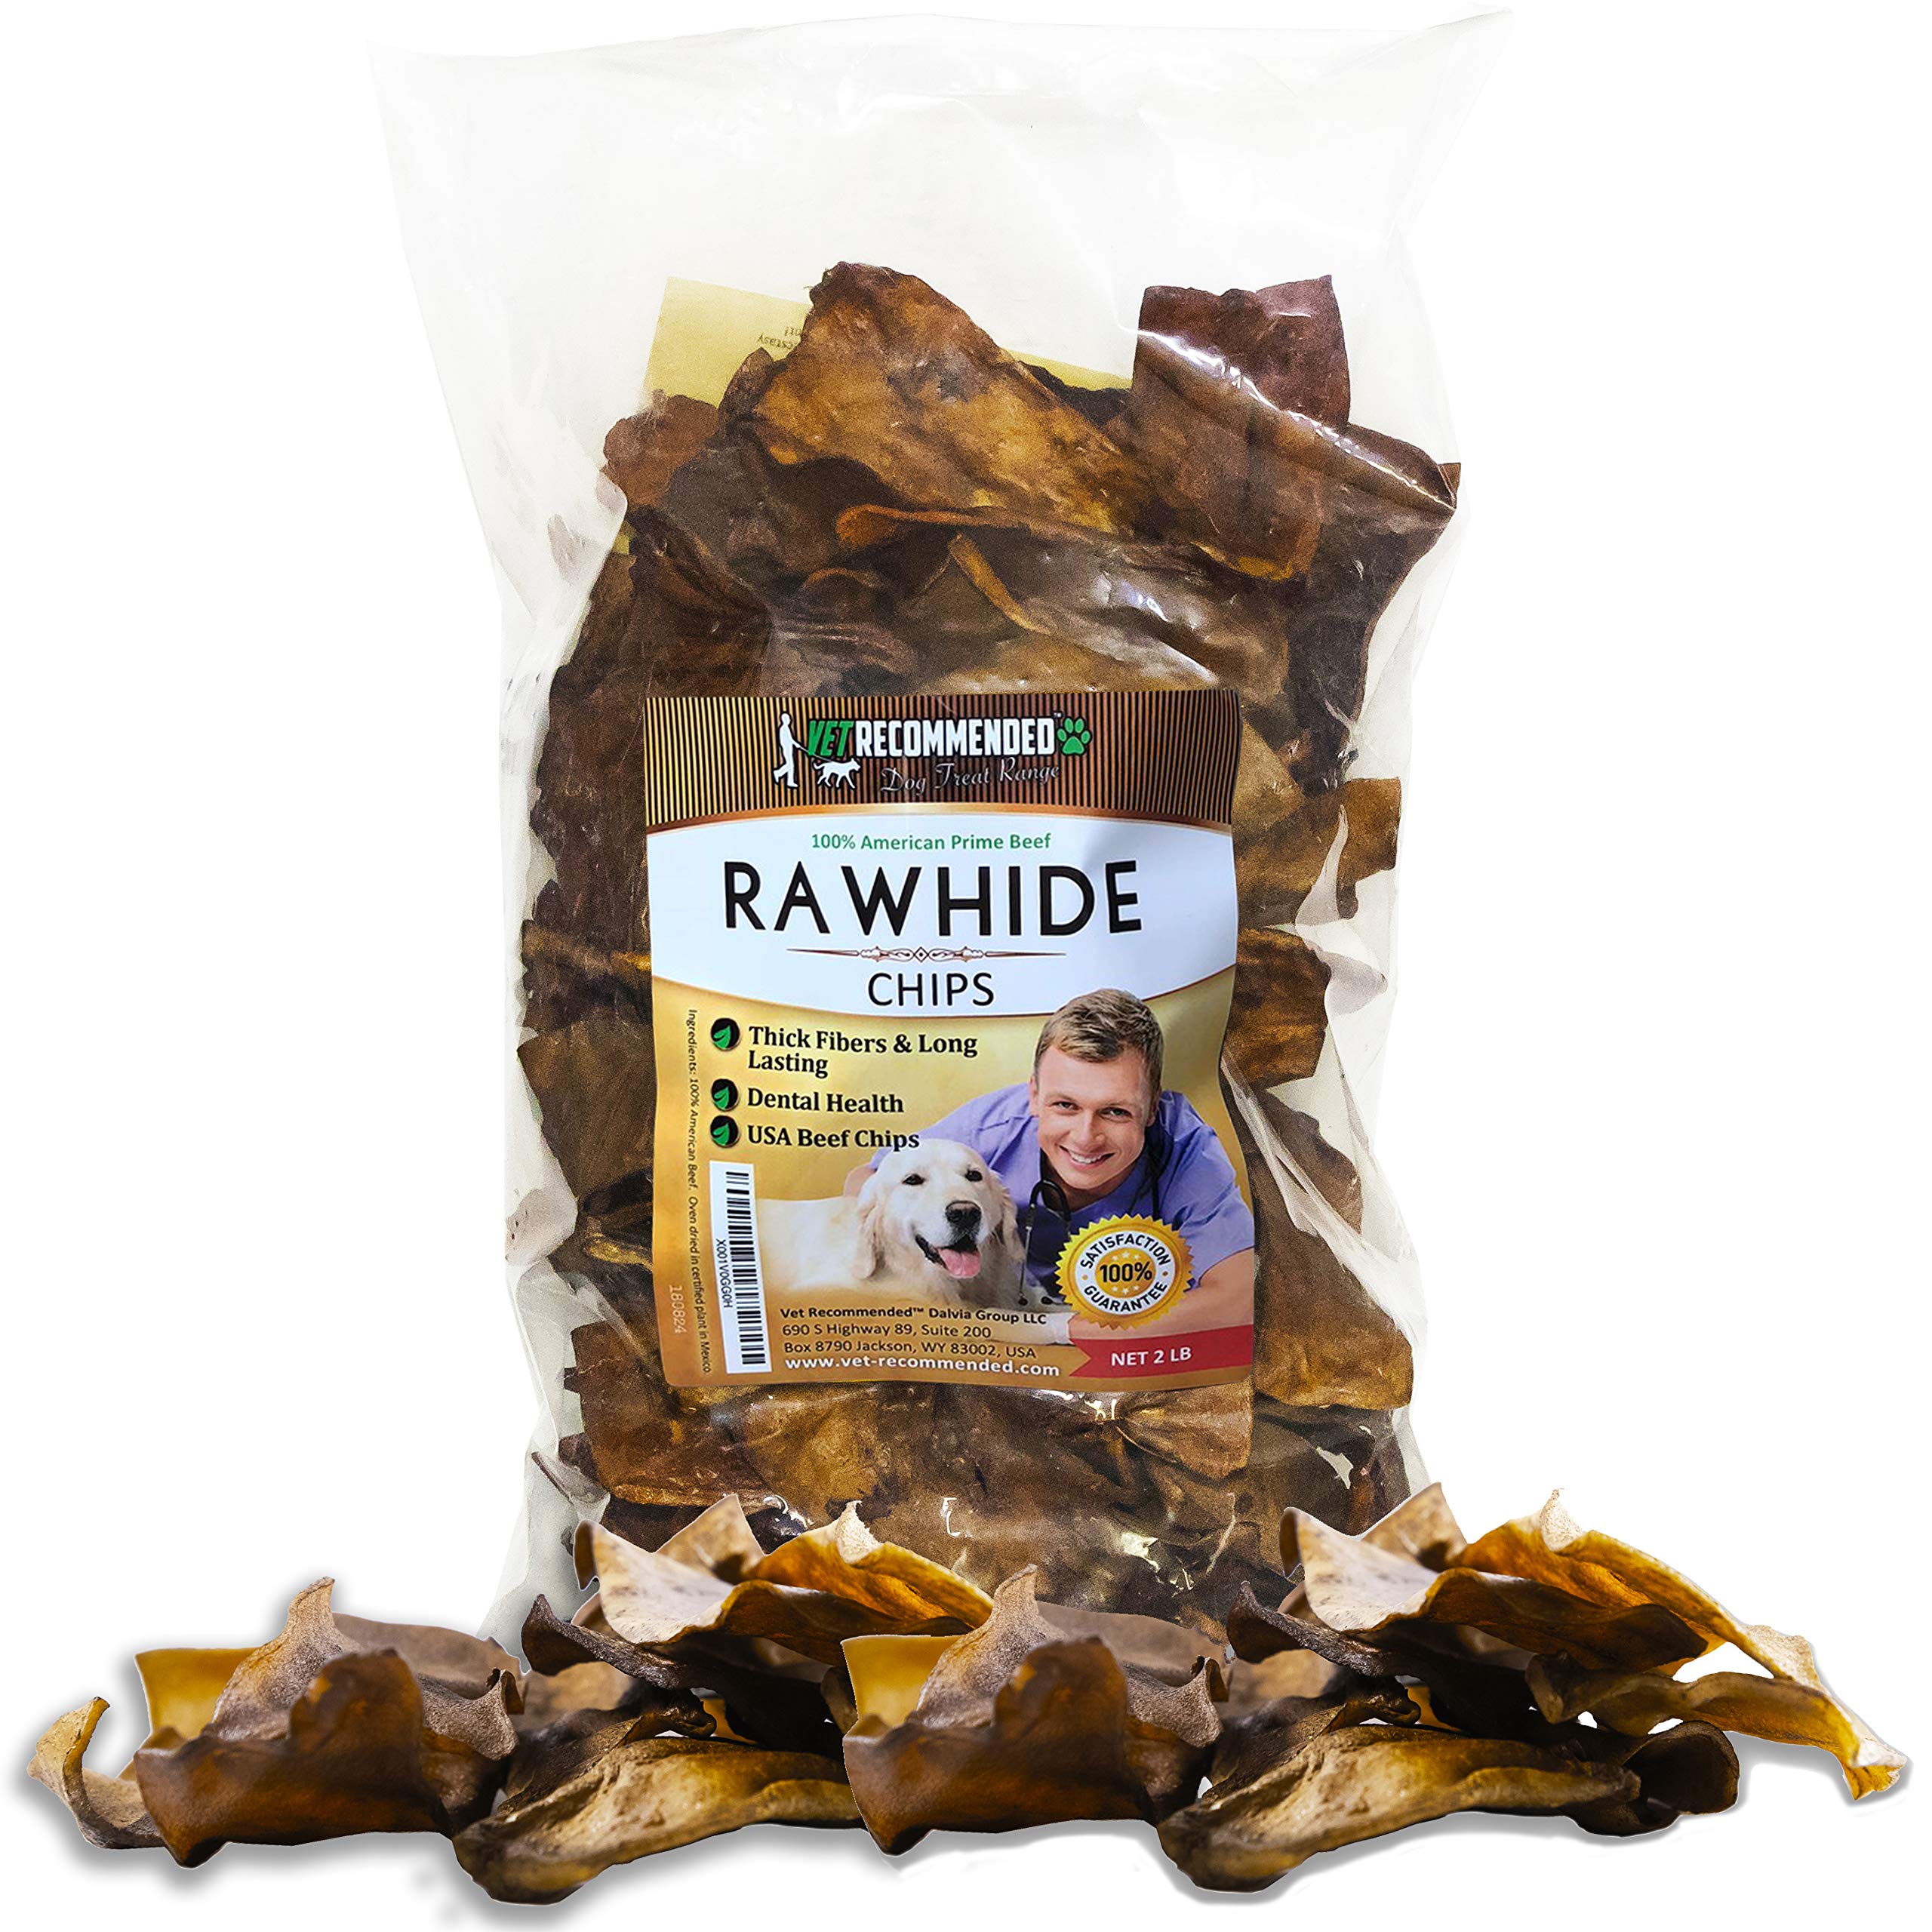 vet recommended premium beef rawhide chips for dogs (big 2lb bag) thick fiber & long lasting dog chew. made in usa.